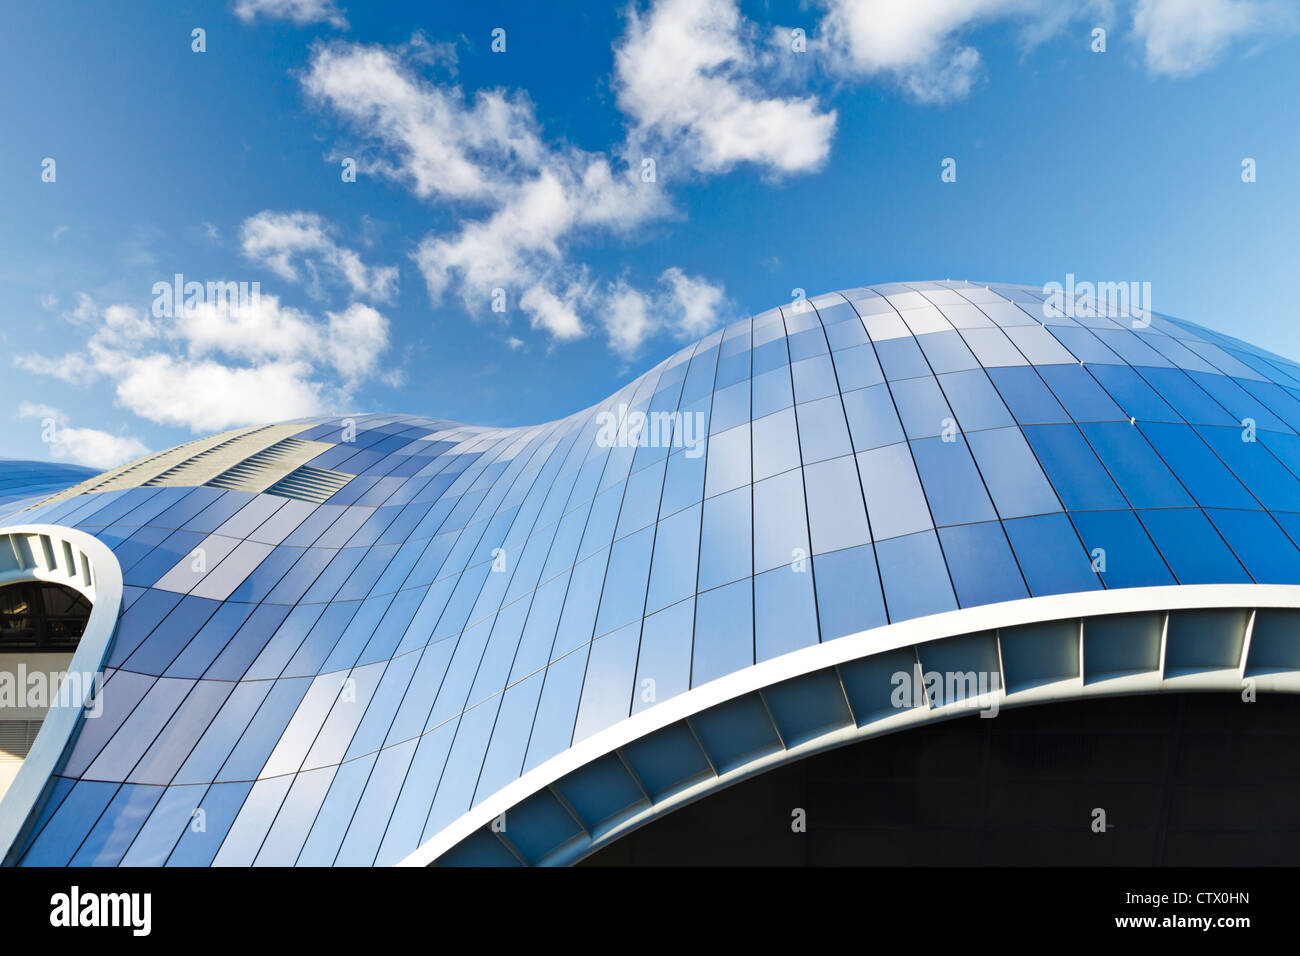 The glass roof of the Sage concert hall reflecting clouds in a blue sky, Gateshead, Tyne and Wear, England Stock Photo